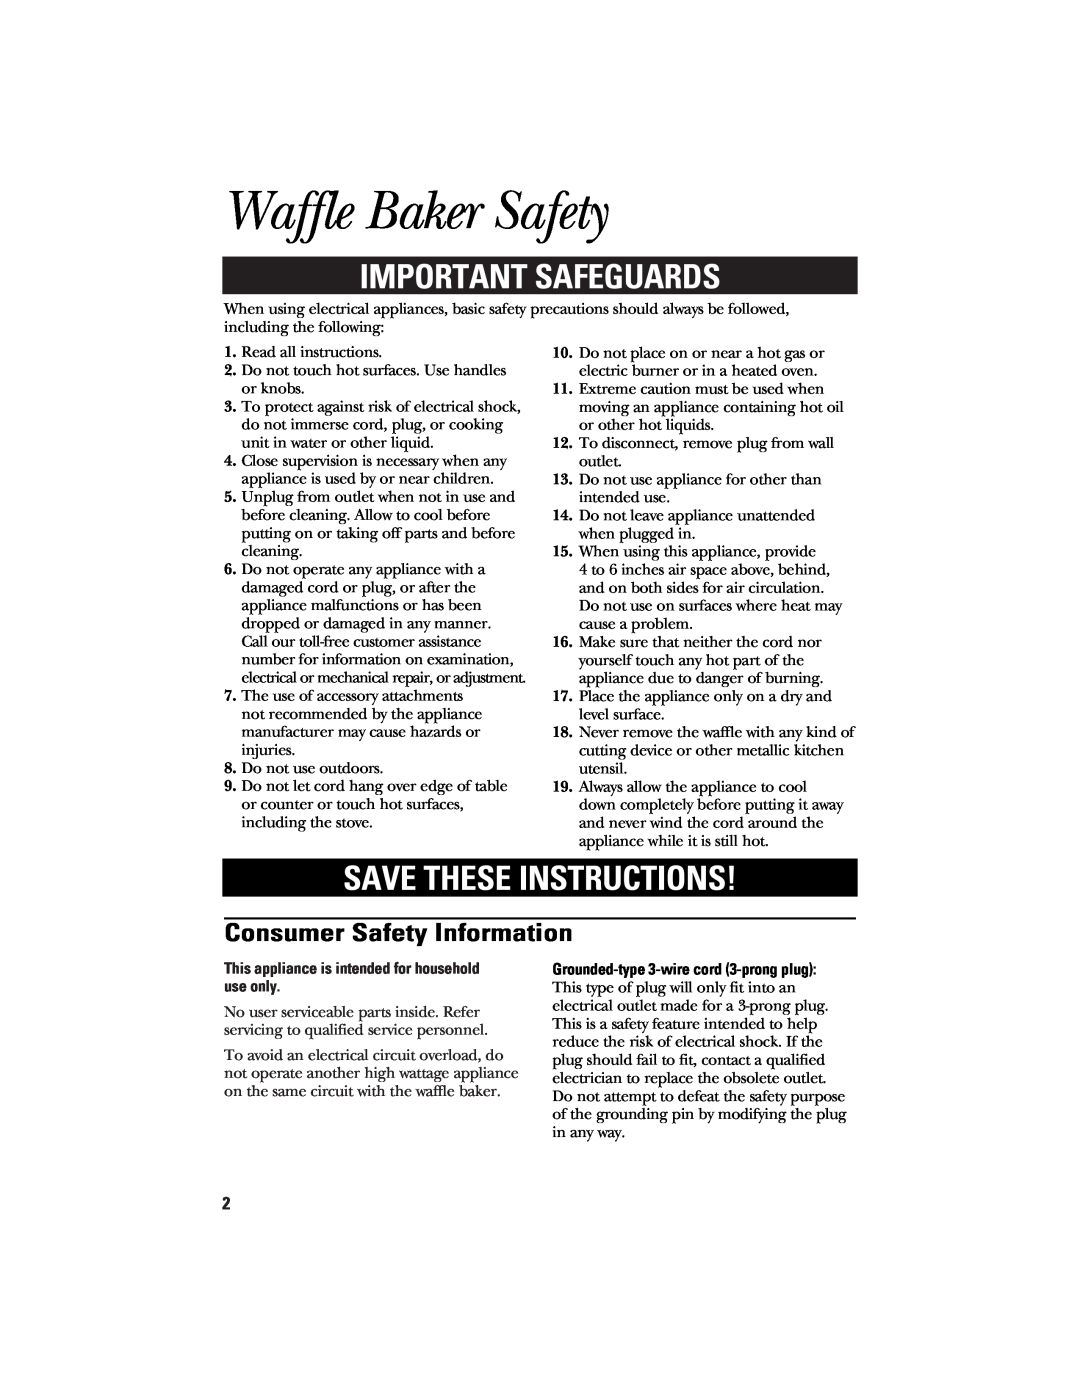 GE 840085600 manual Waffle Baker Safety, Important Safeguards, Save These Instructions, Consumer Safety Information 